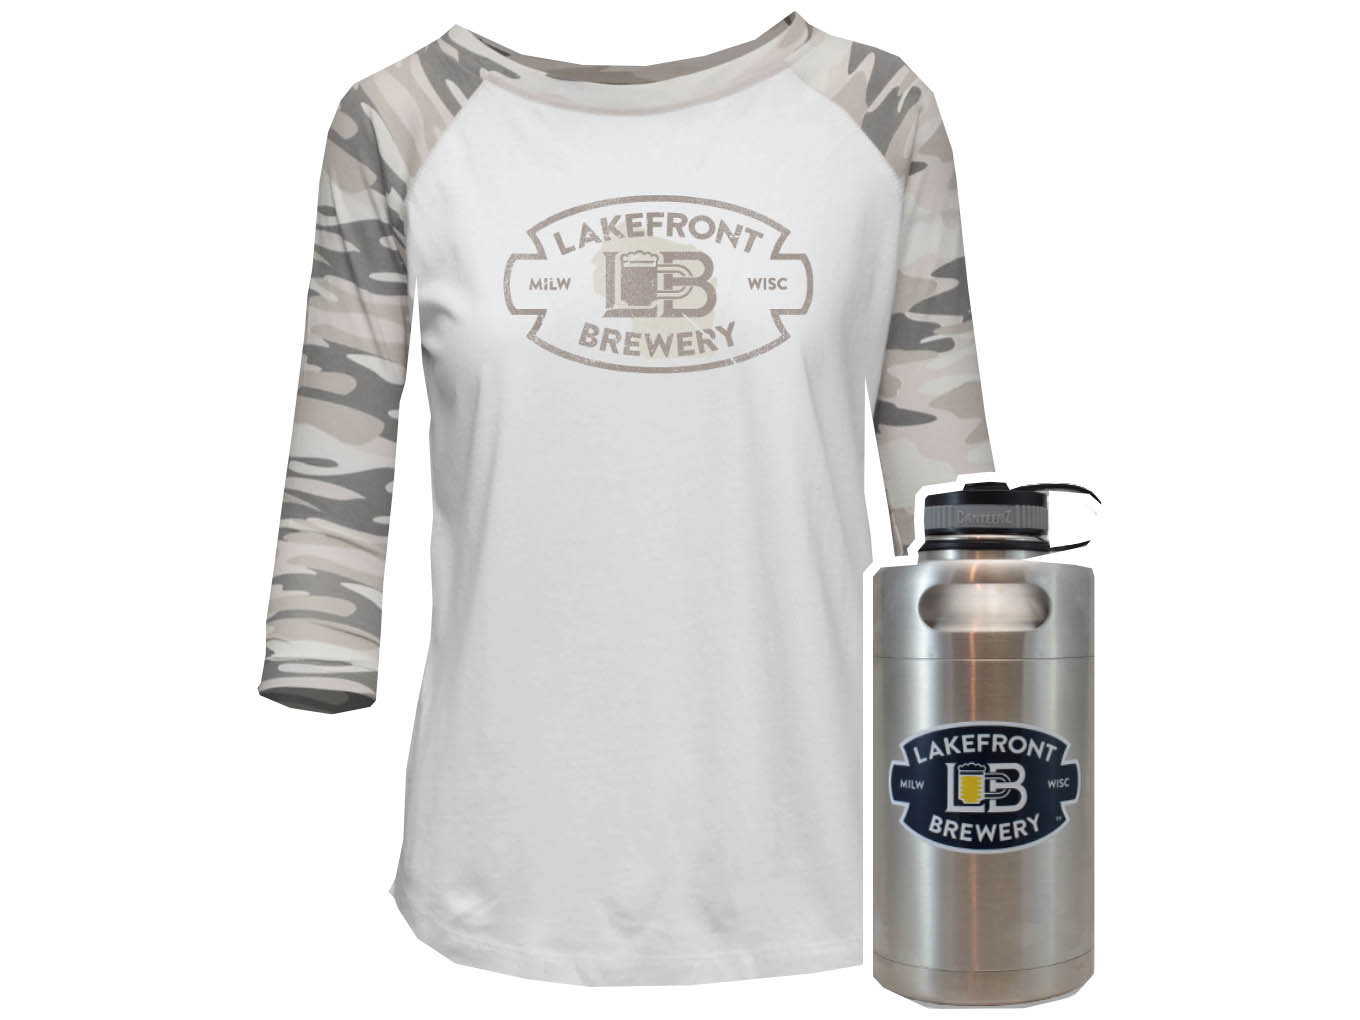 Shop Online For Cool Merch To Help Local Businesses Weather The Storm Onmilwaukee